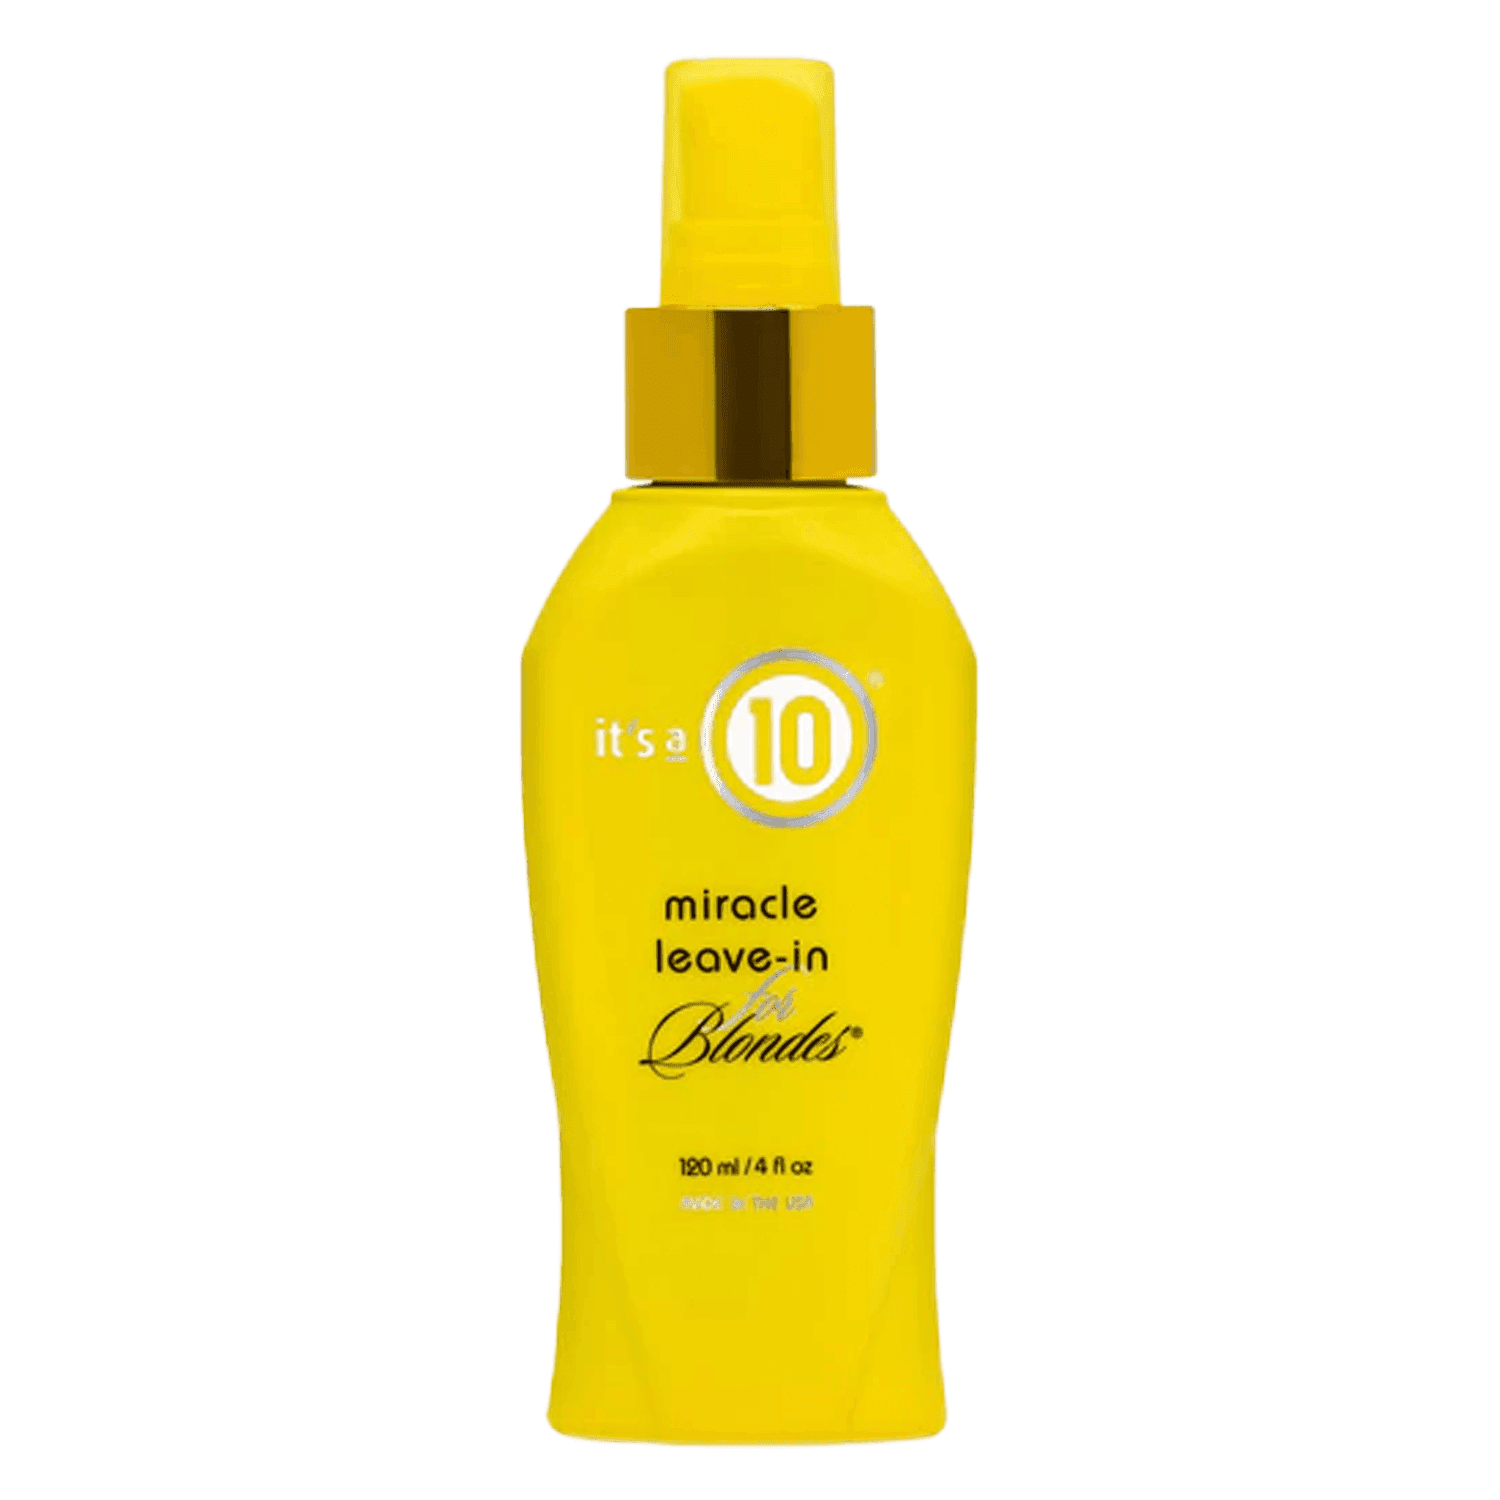 it's a 10 haircare - Miracle Leave-In for Blondes